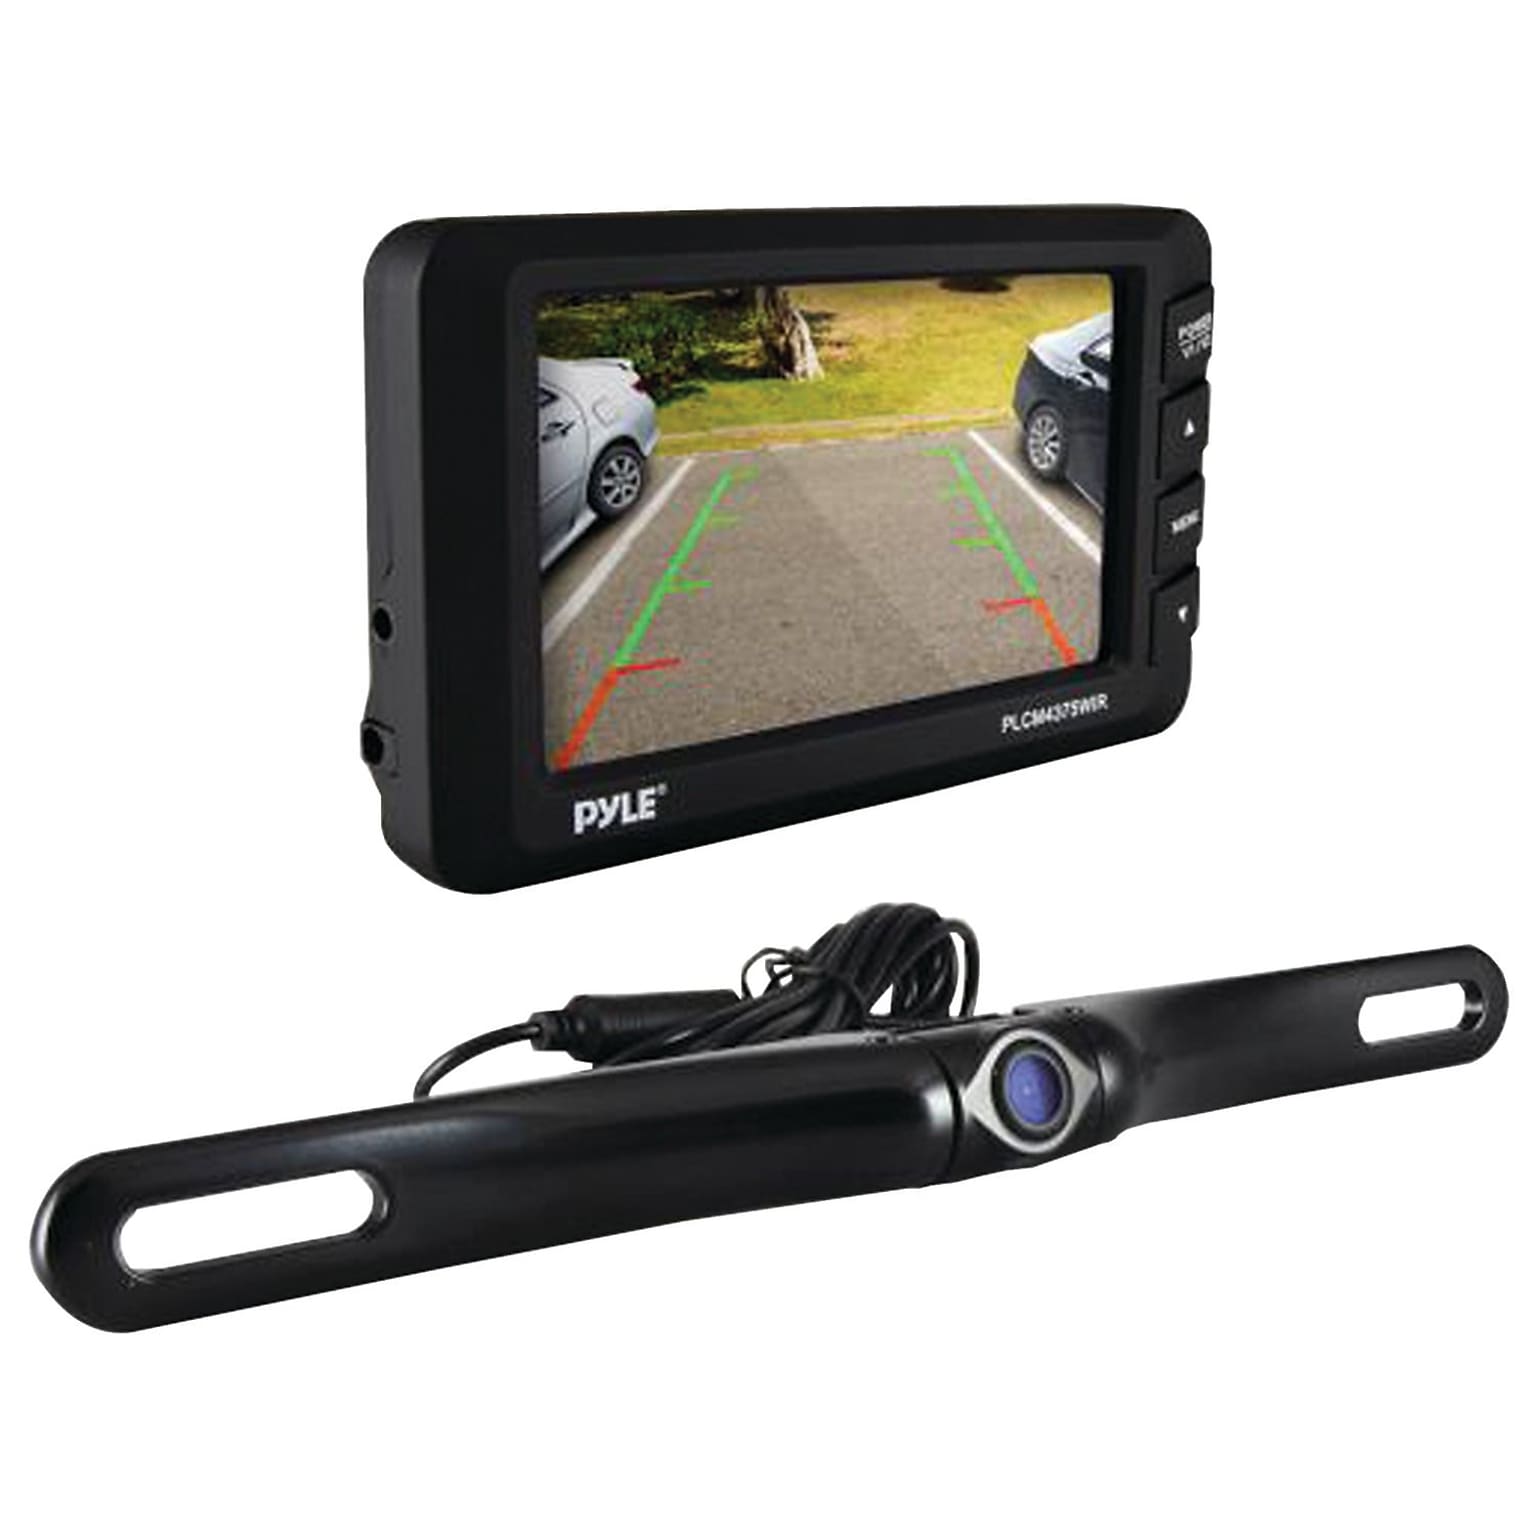 Pyle 4.3 LCD Monitor & Wireless Rearview Backup Camera with Parking/Reverse Assist System (PLCM4375WIR)